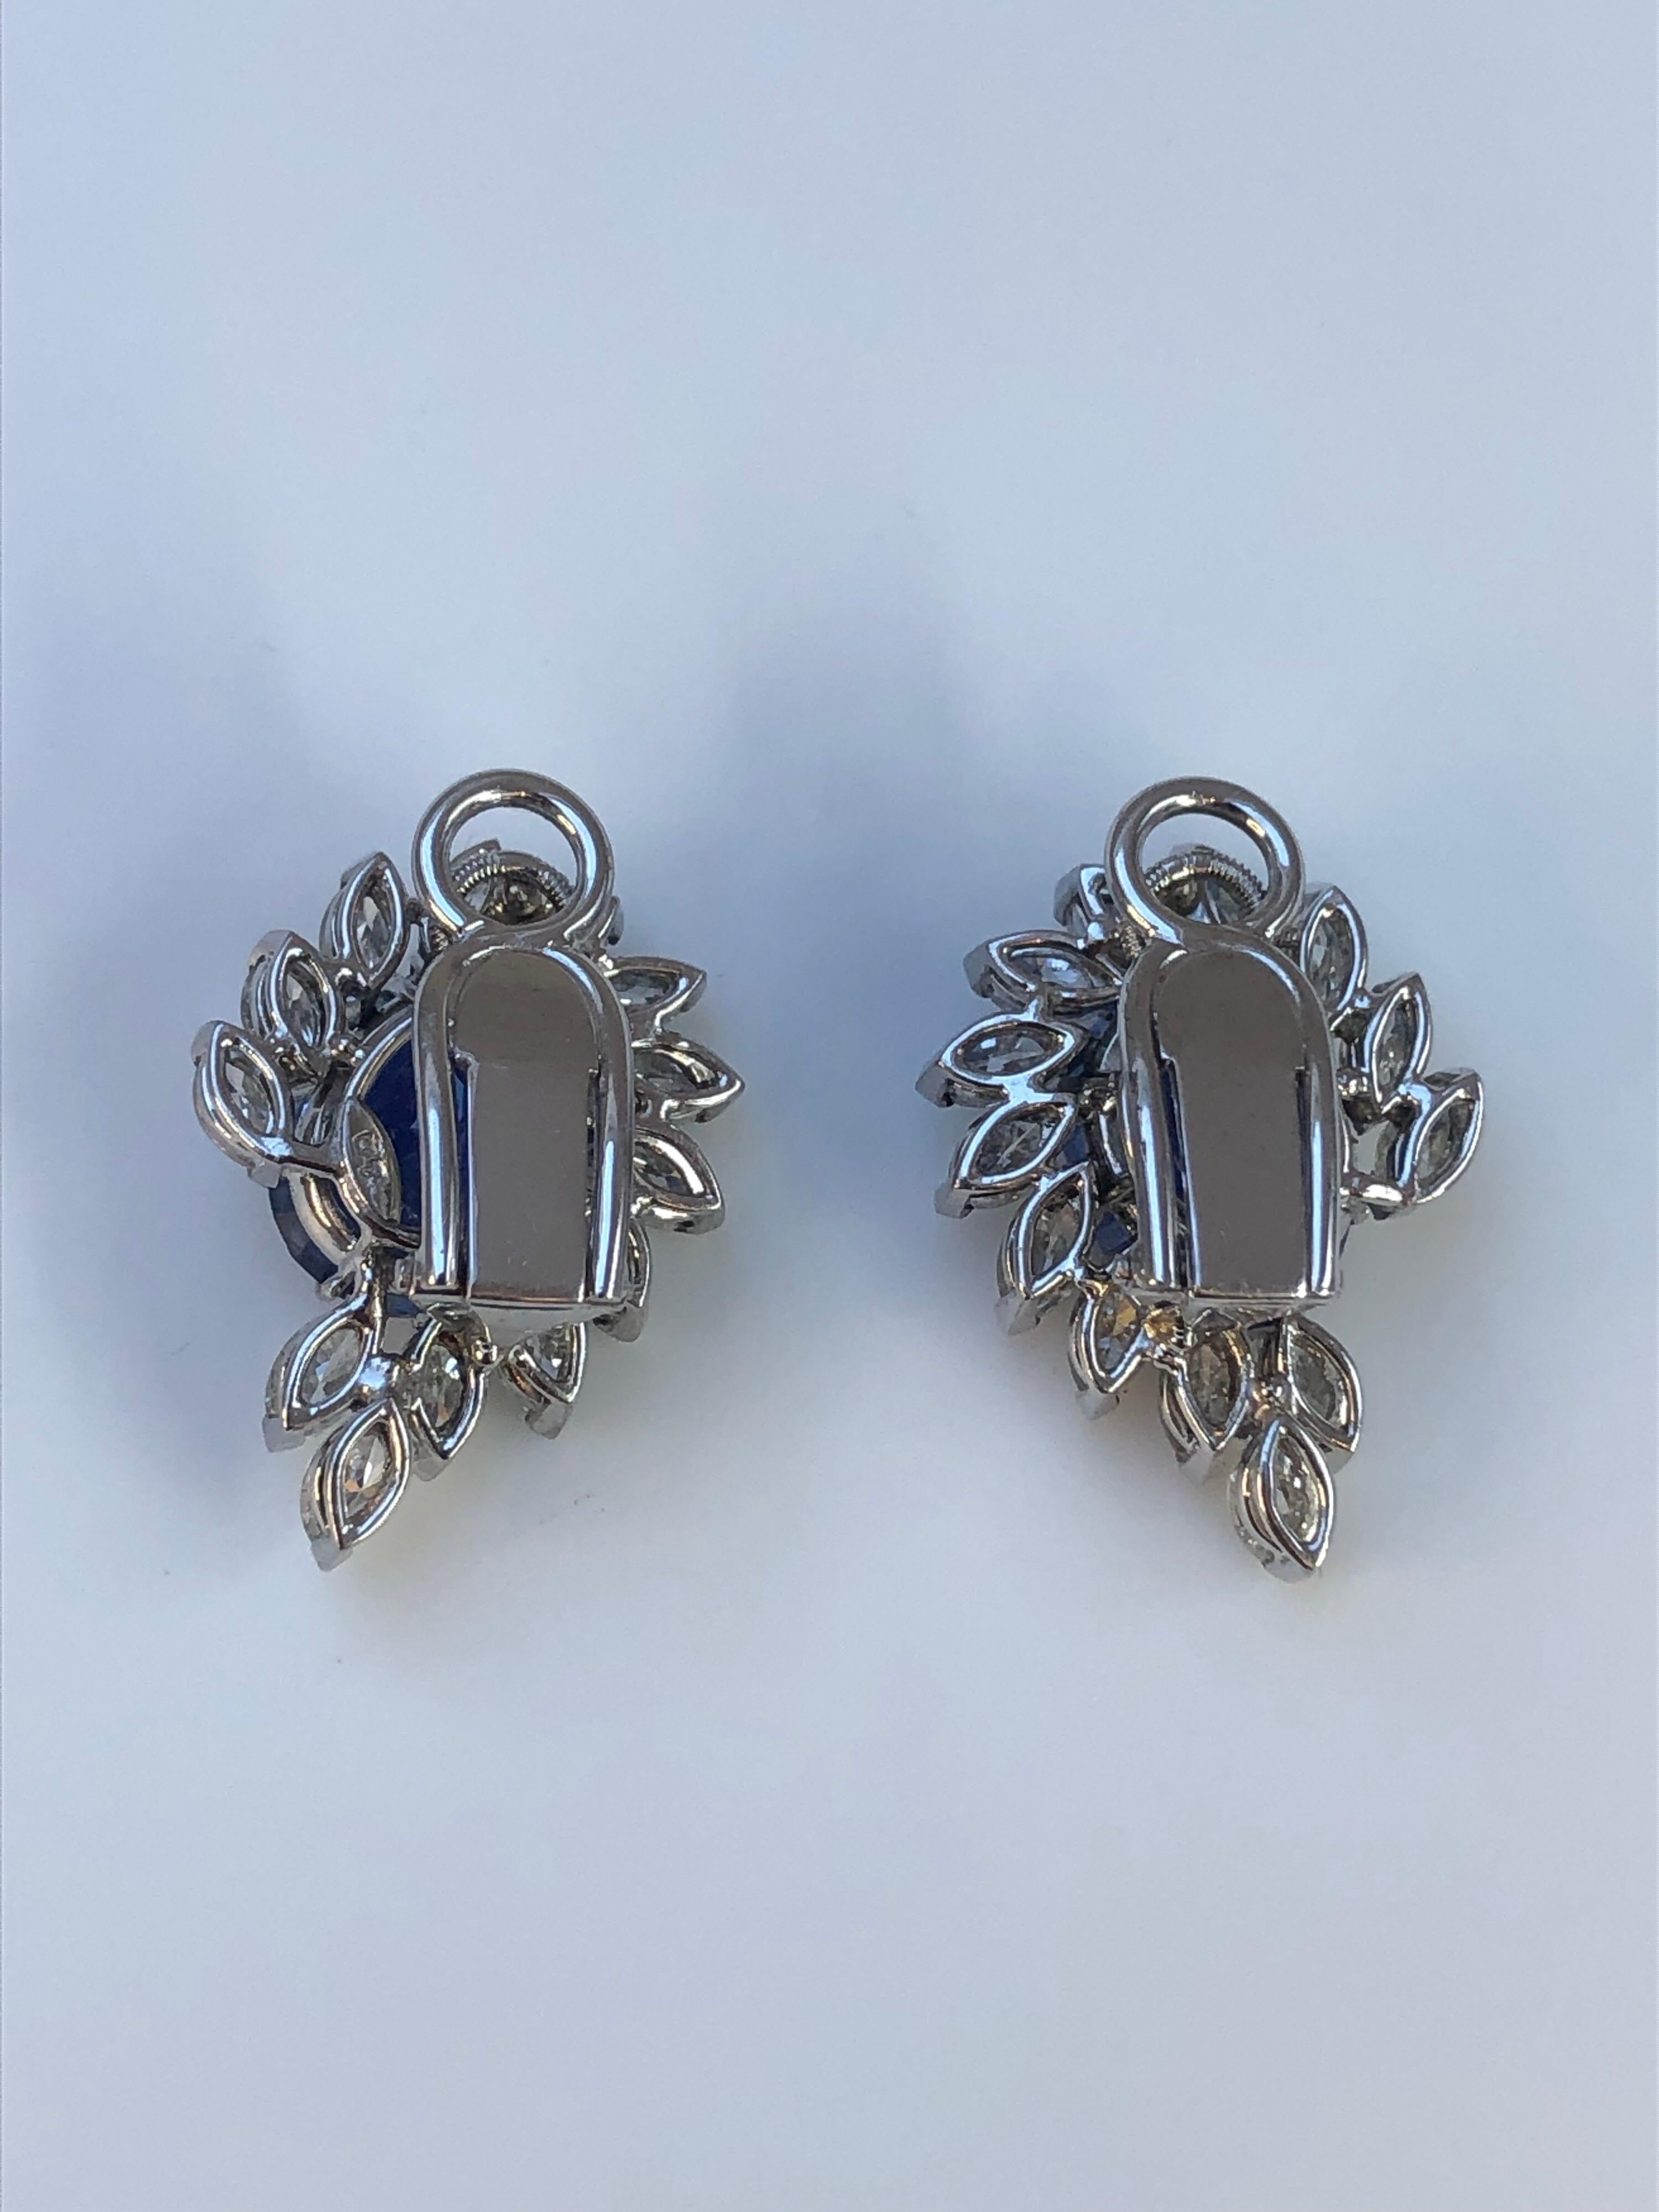 Contemporary Pair of Sapphire and Diamond Earrings SSEF 14.92 Carat Untreated Sapphires For Sale